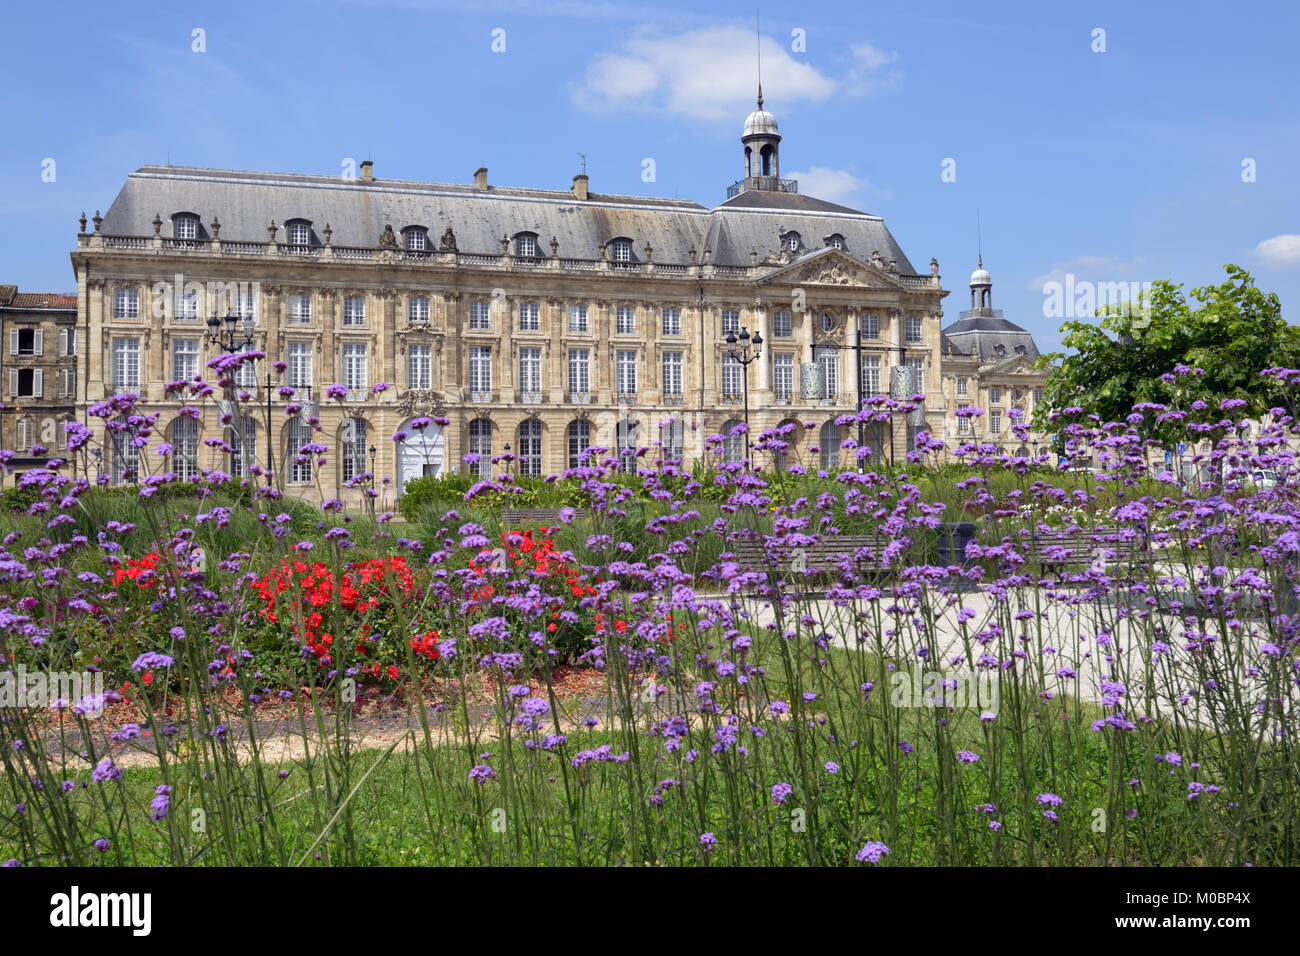 Bordeaux, France - June 27, 2013: View to the building of National museum of customs from the embankment of Garonne river. The museum is housed in the Stock Photo